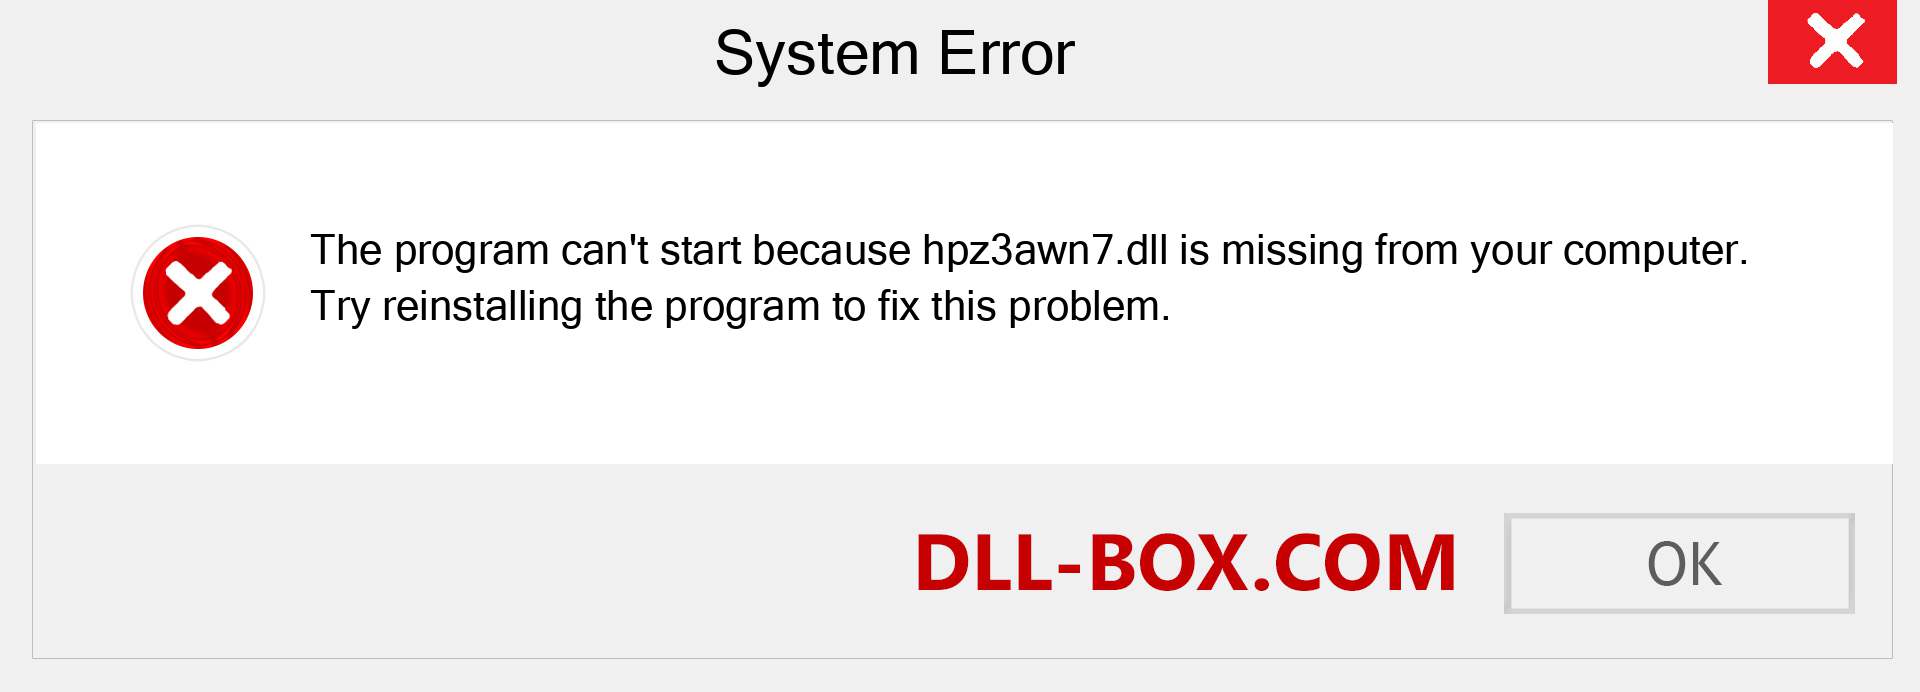  hpz3awn7.dll file is missing?. Download for Windows 7, 8, 10 - Fix  hpz3awn7 dll Missing Error on Windows, photos, images